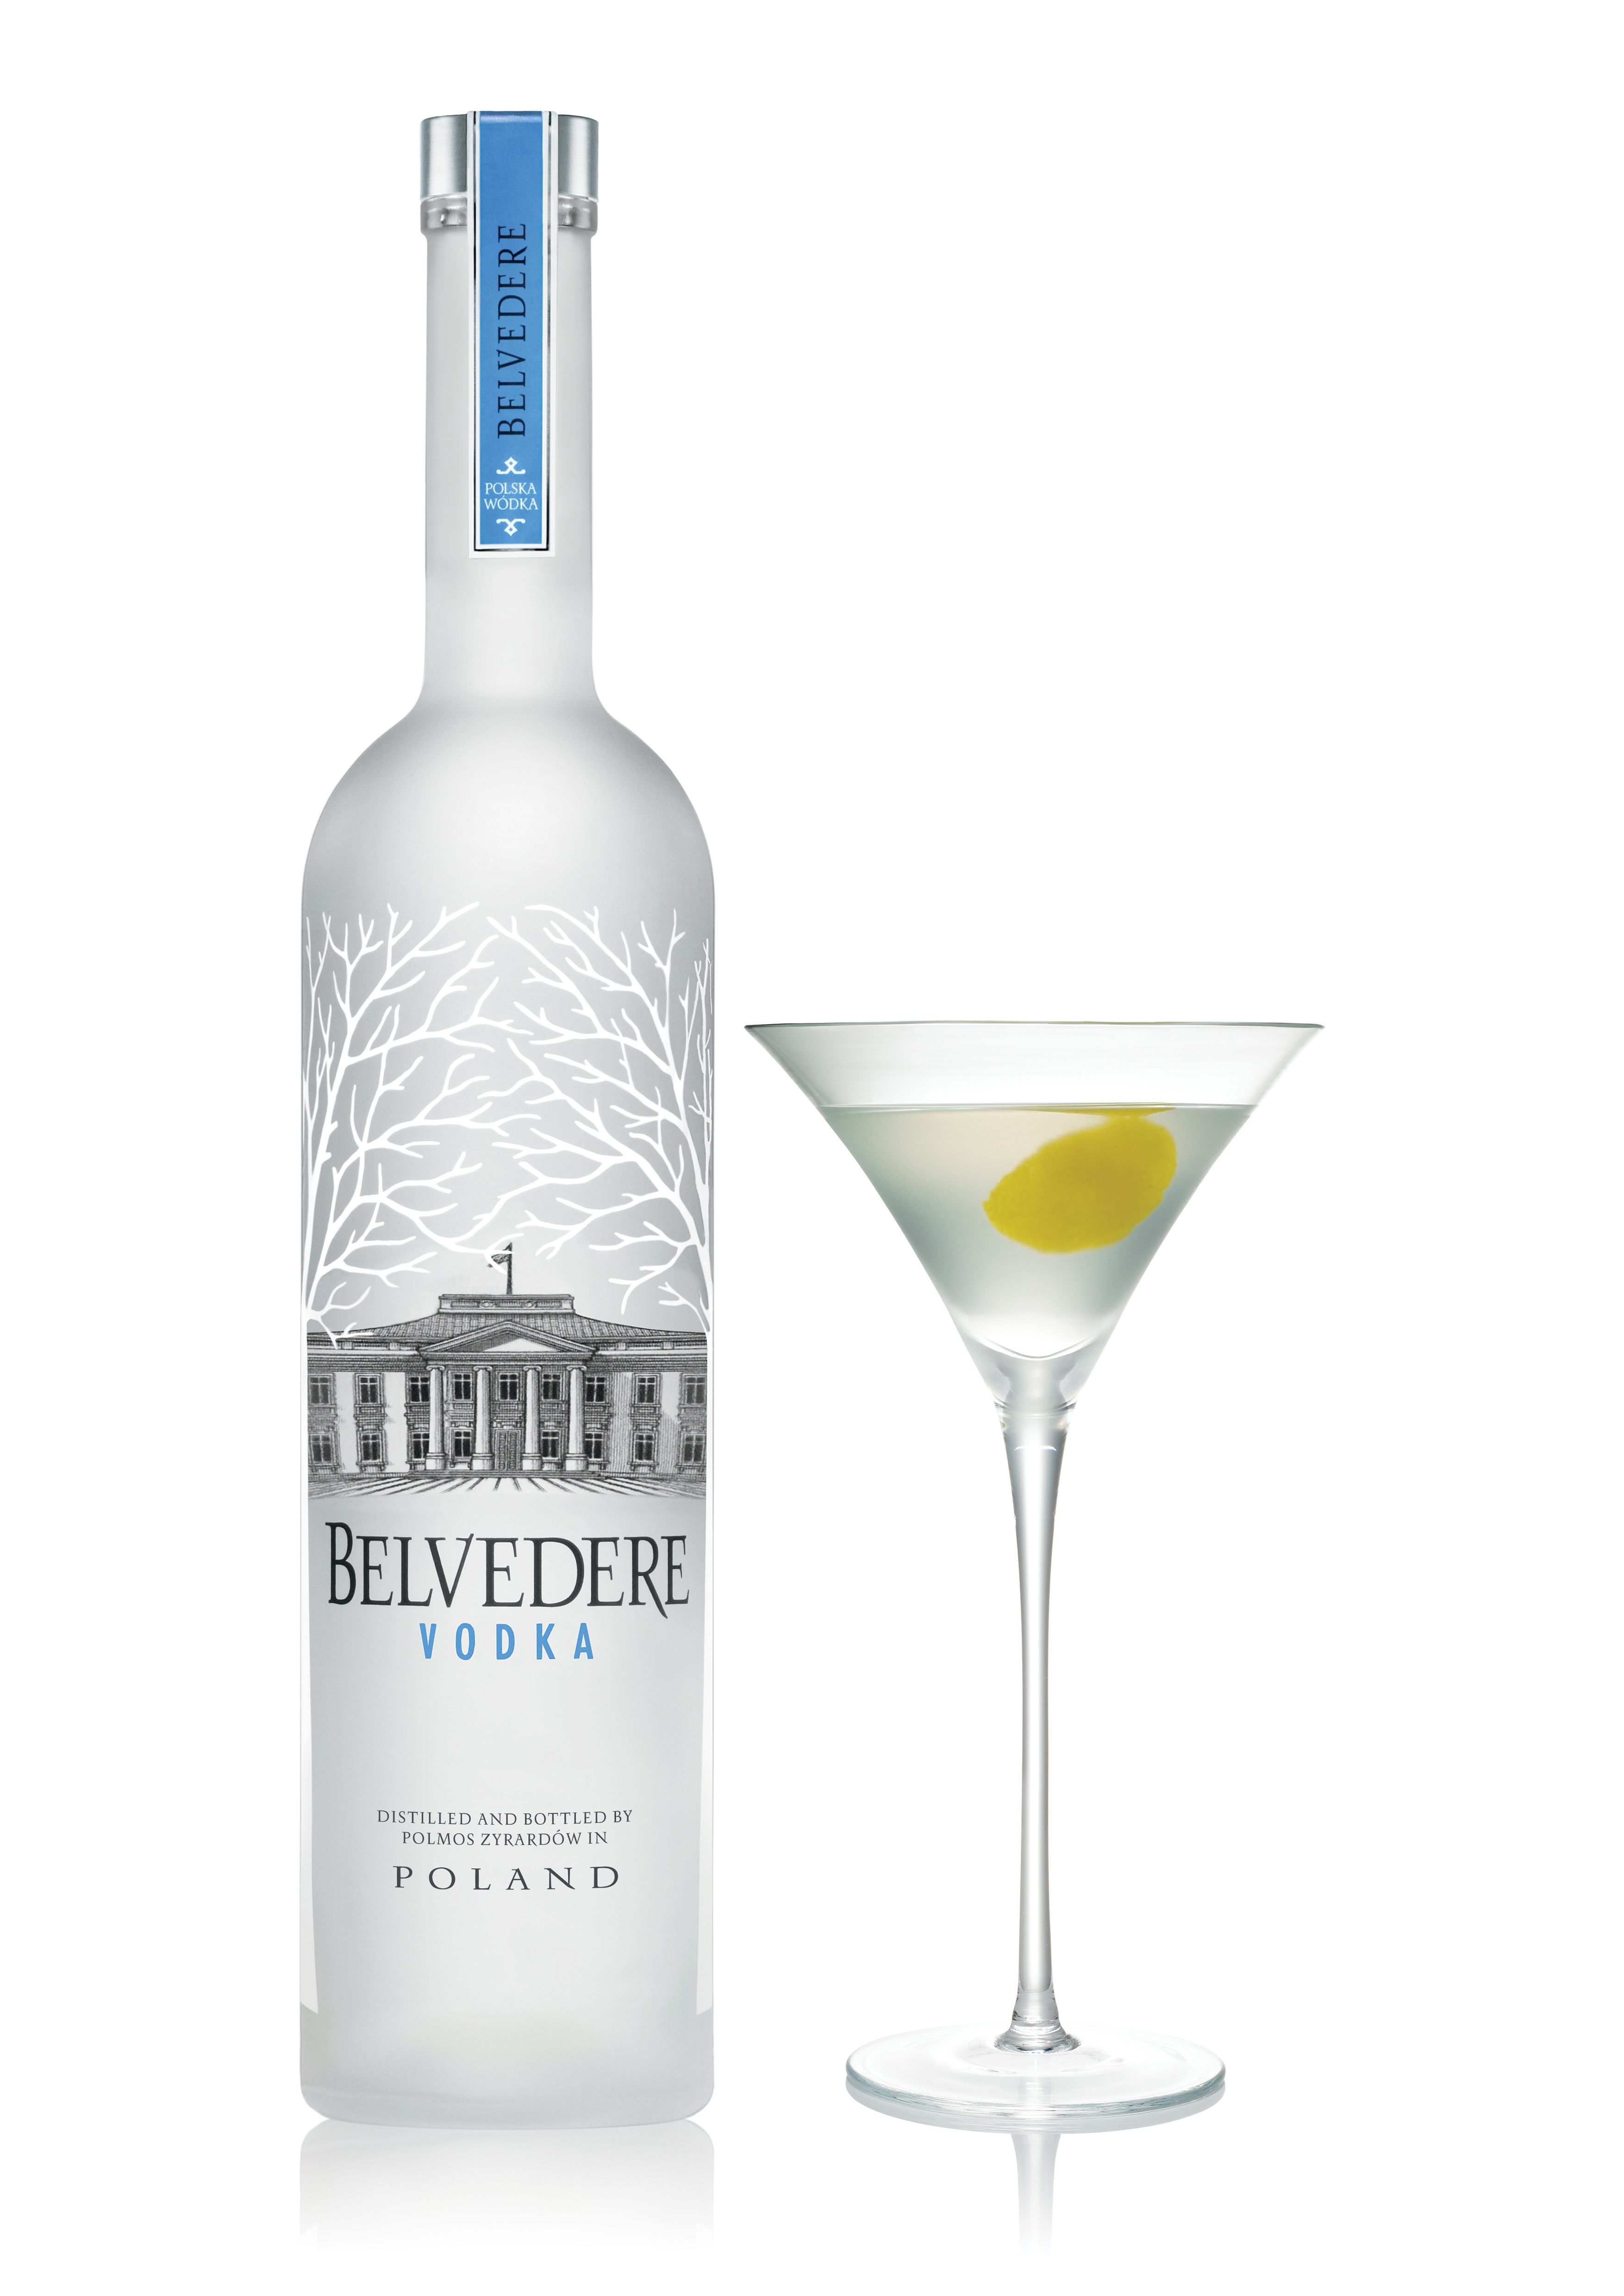 Spectre: James Bond partners with Belvedere to drink nice martinis